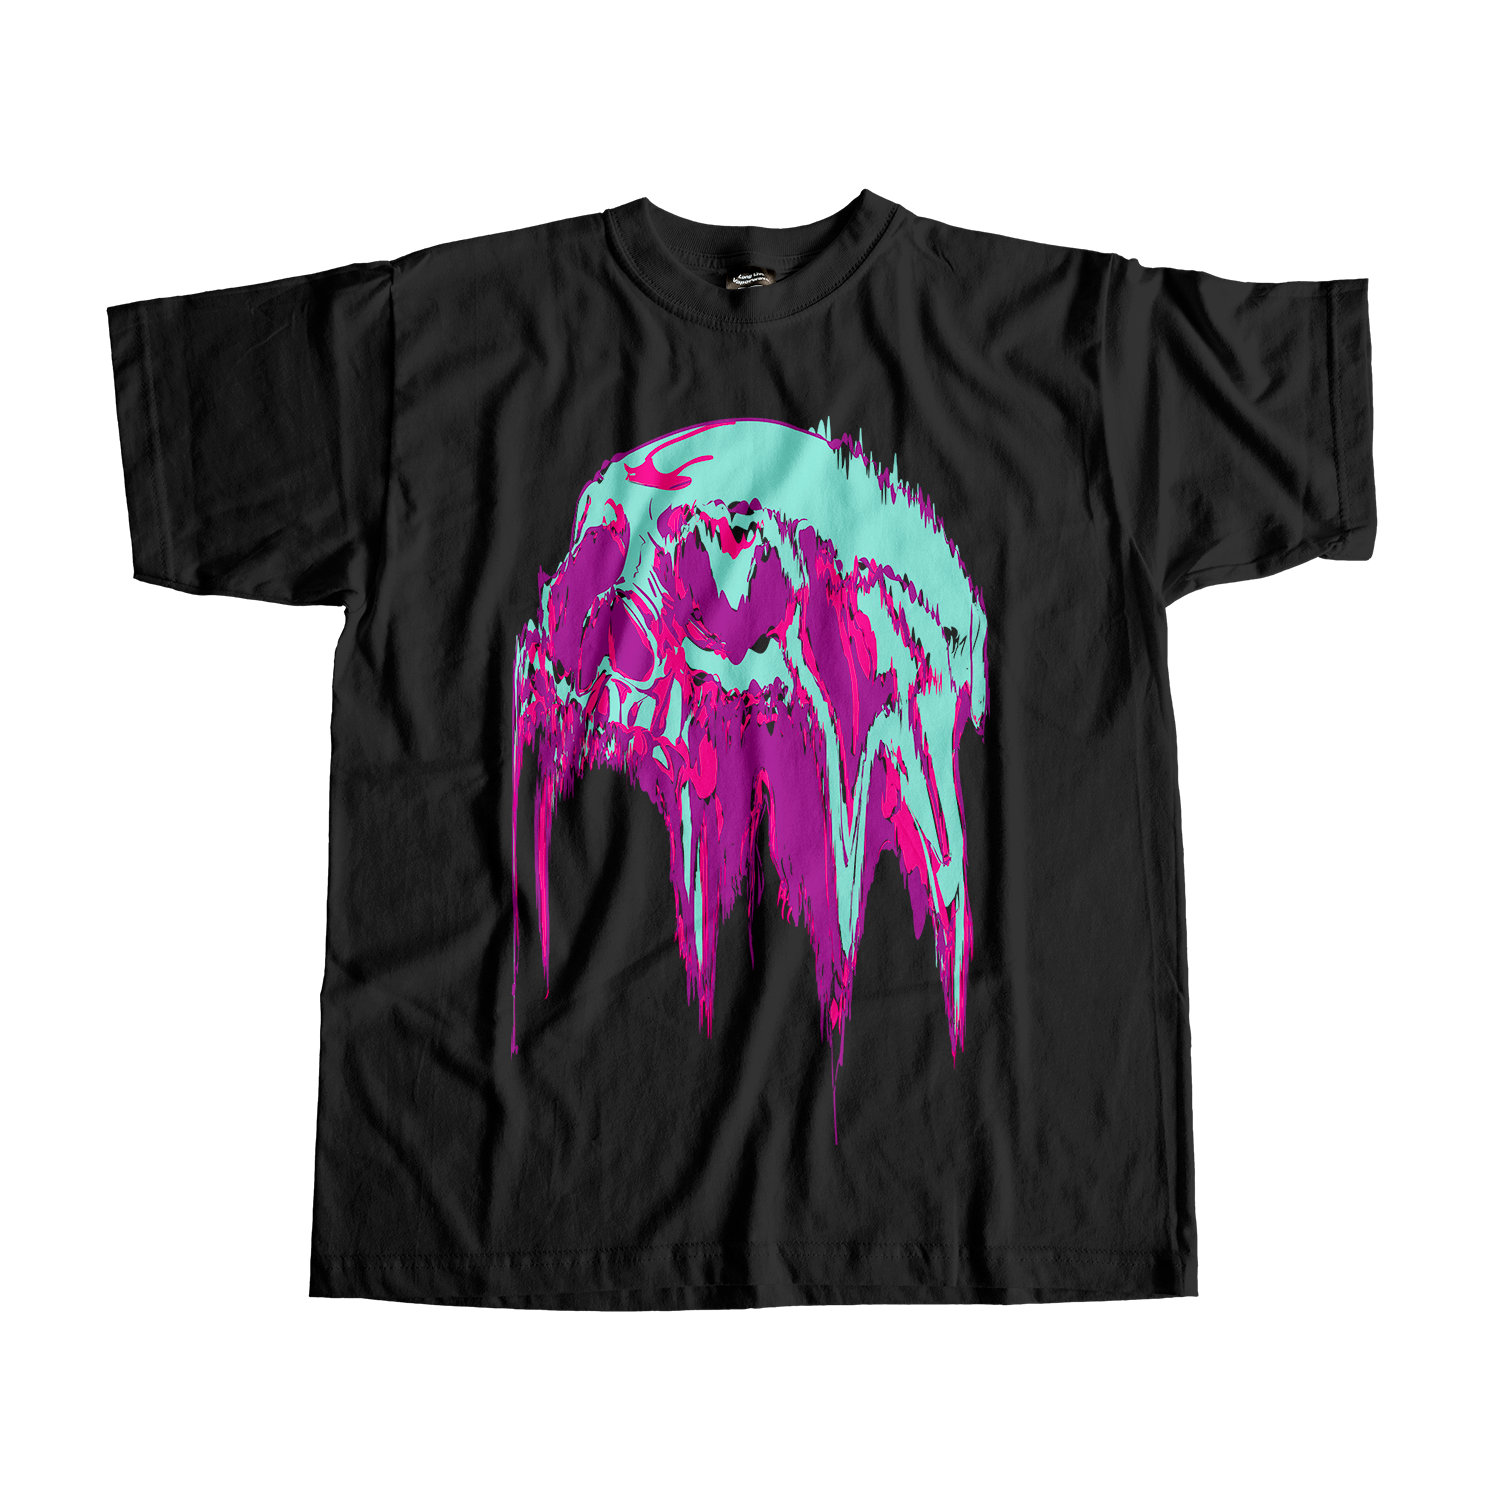 States Of Decay Tee